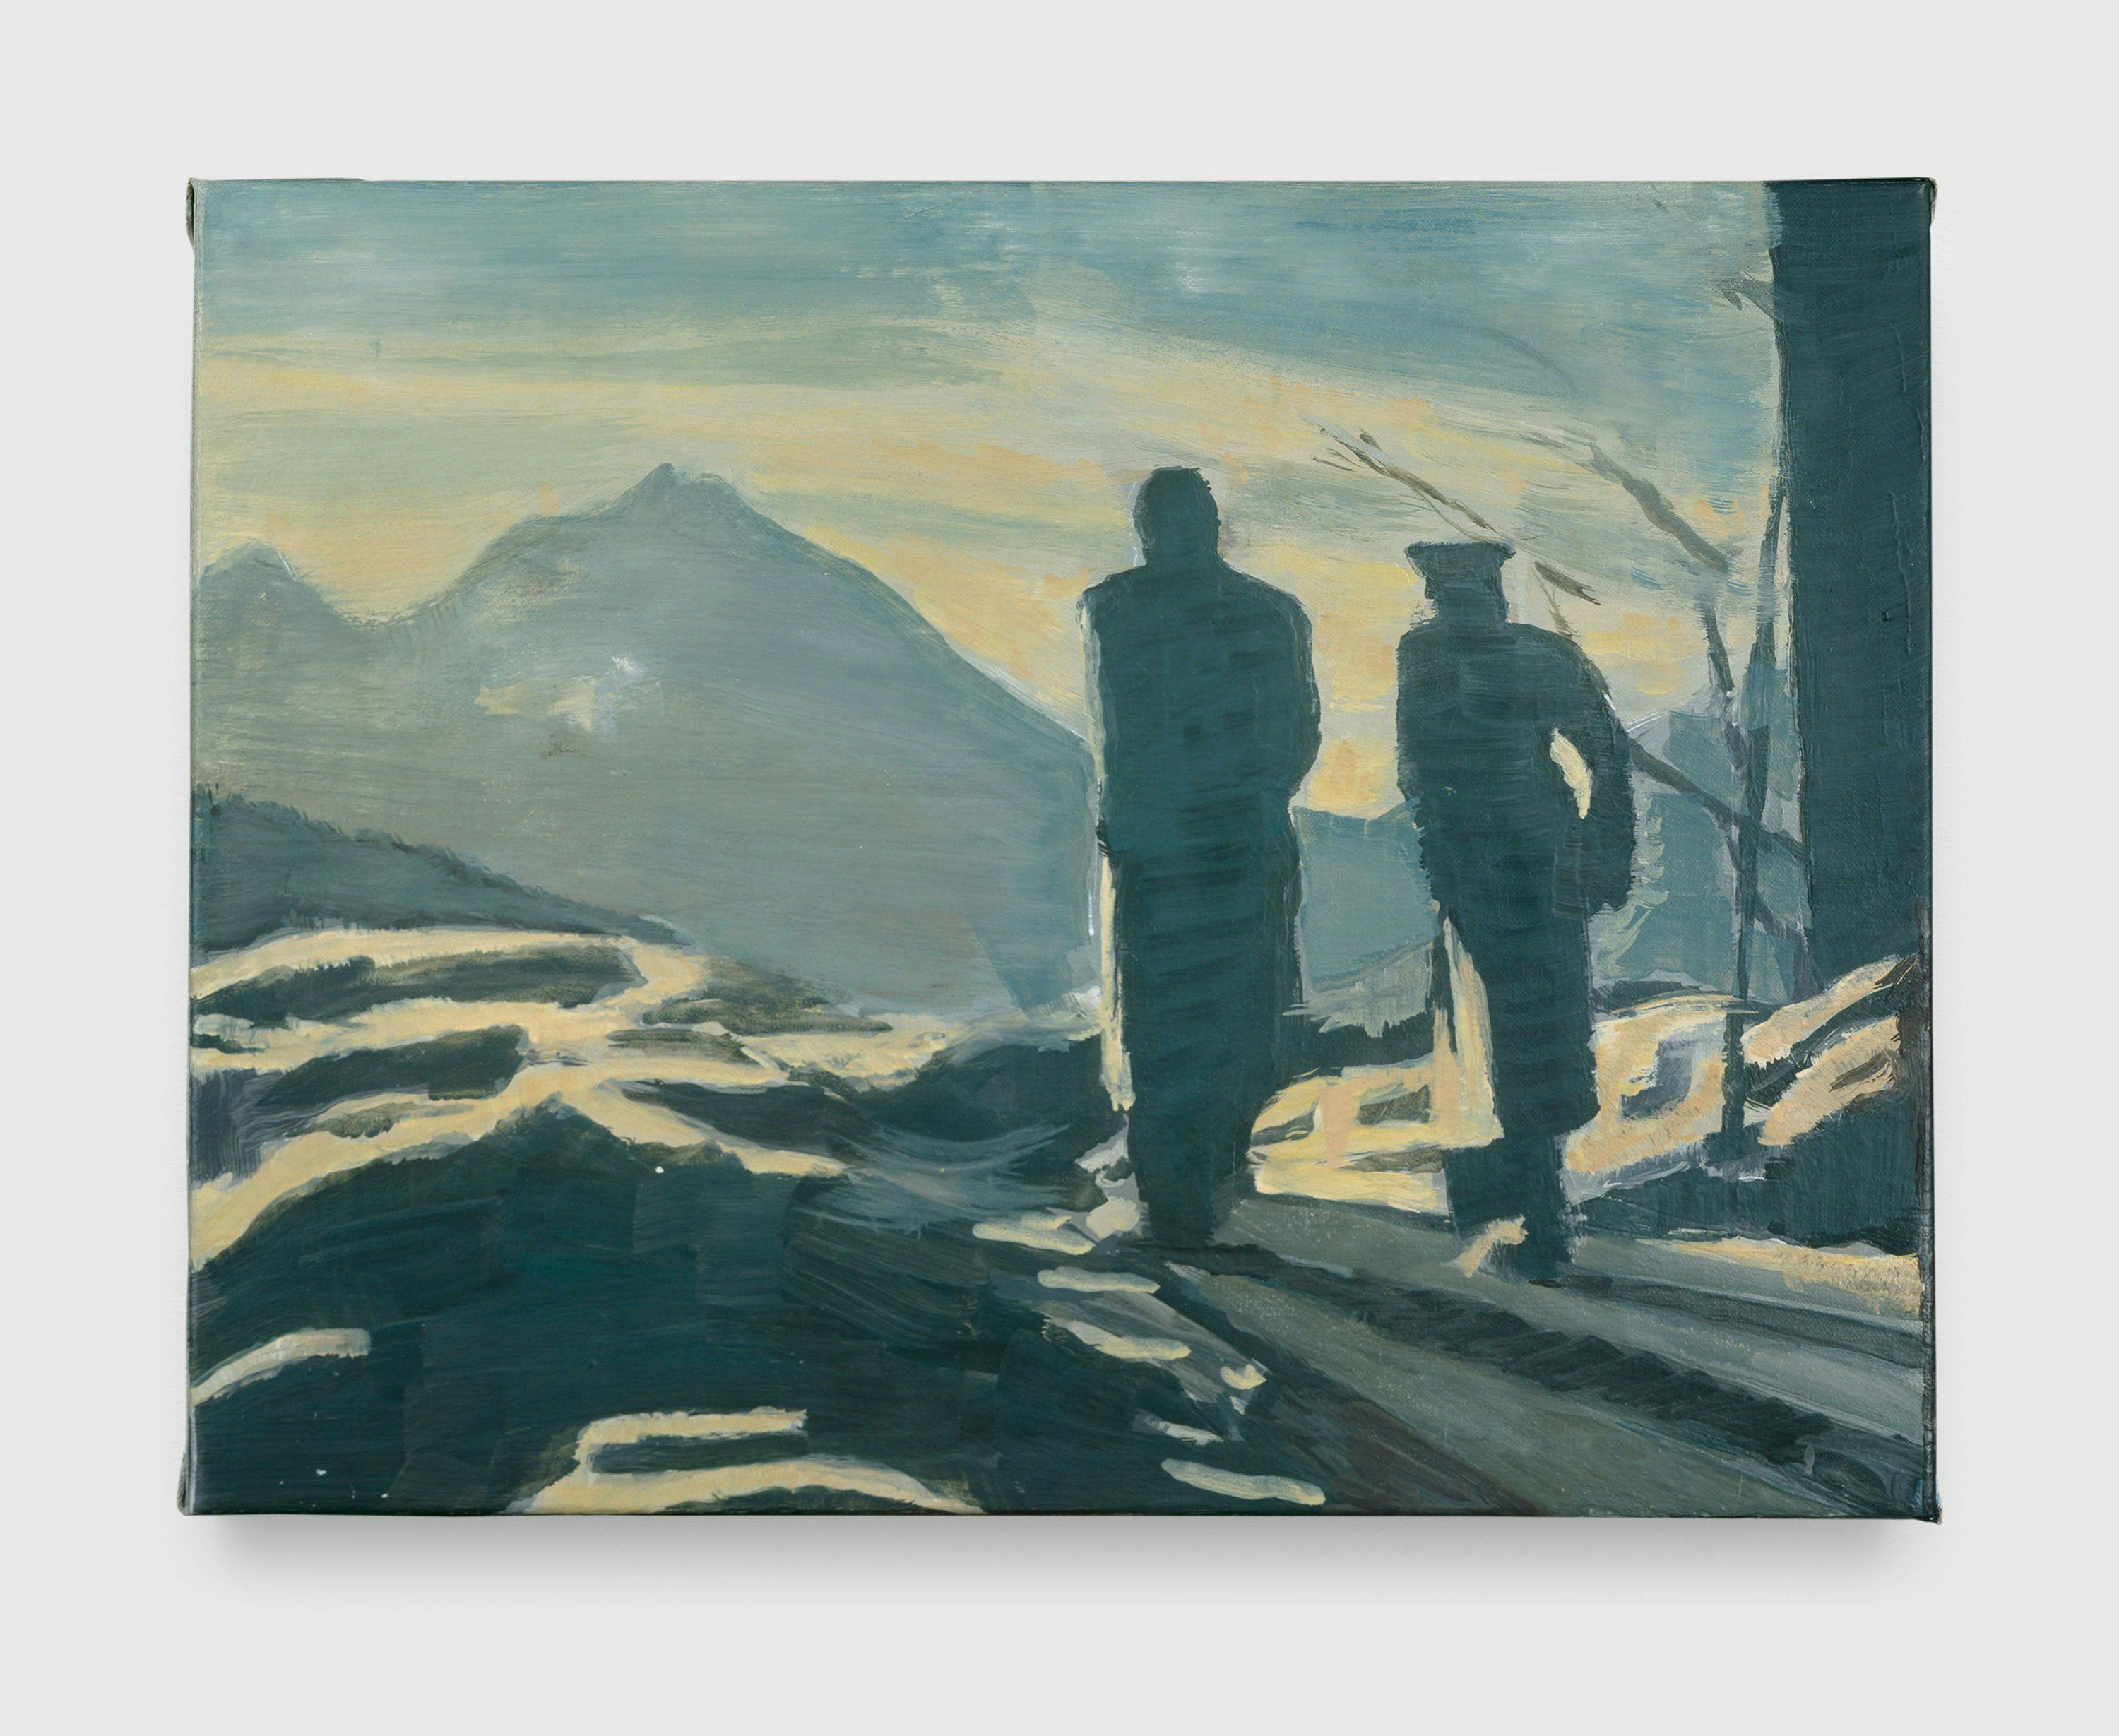 A painting by Luc Tuymans, titled De Wandeling, dated 1991.